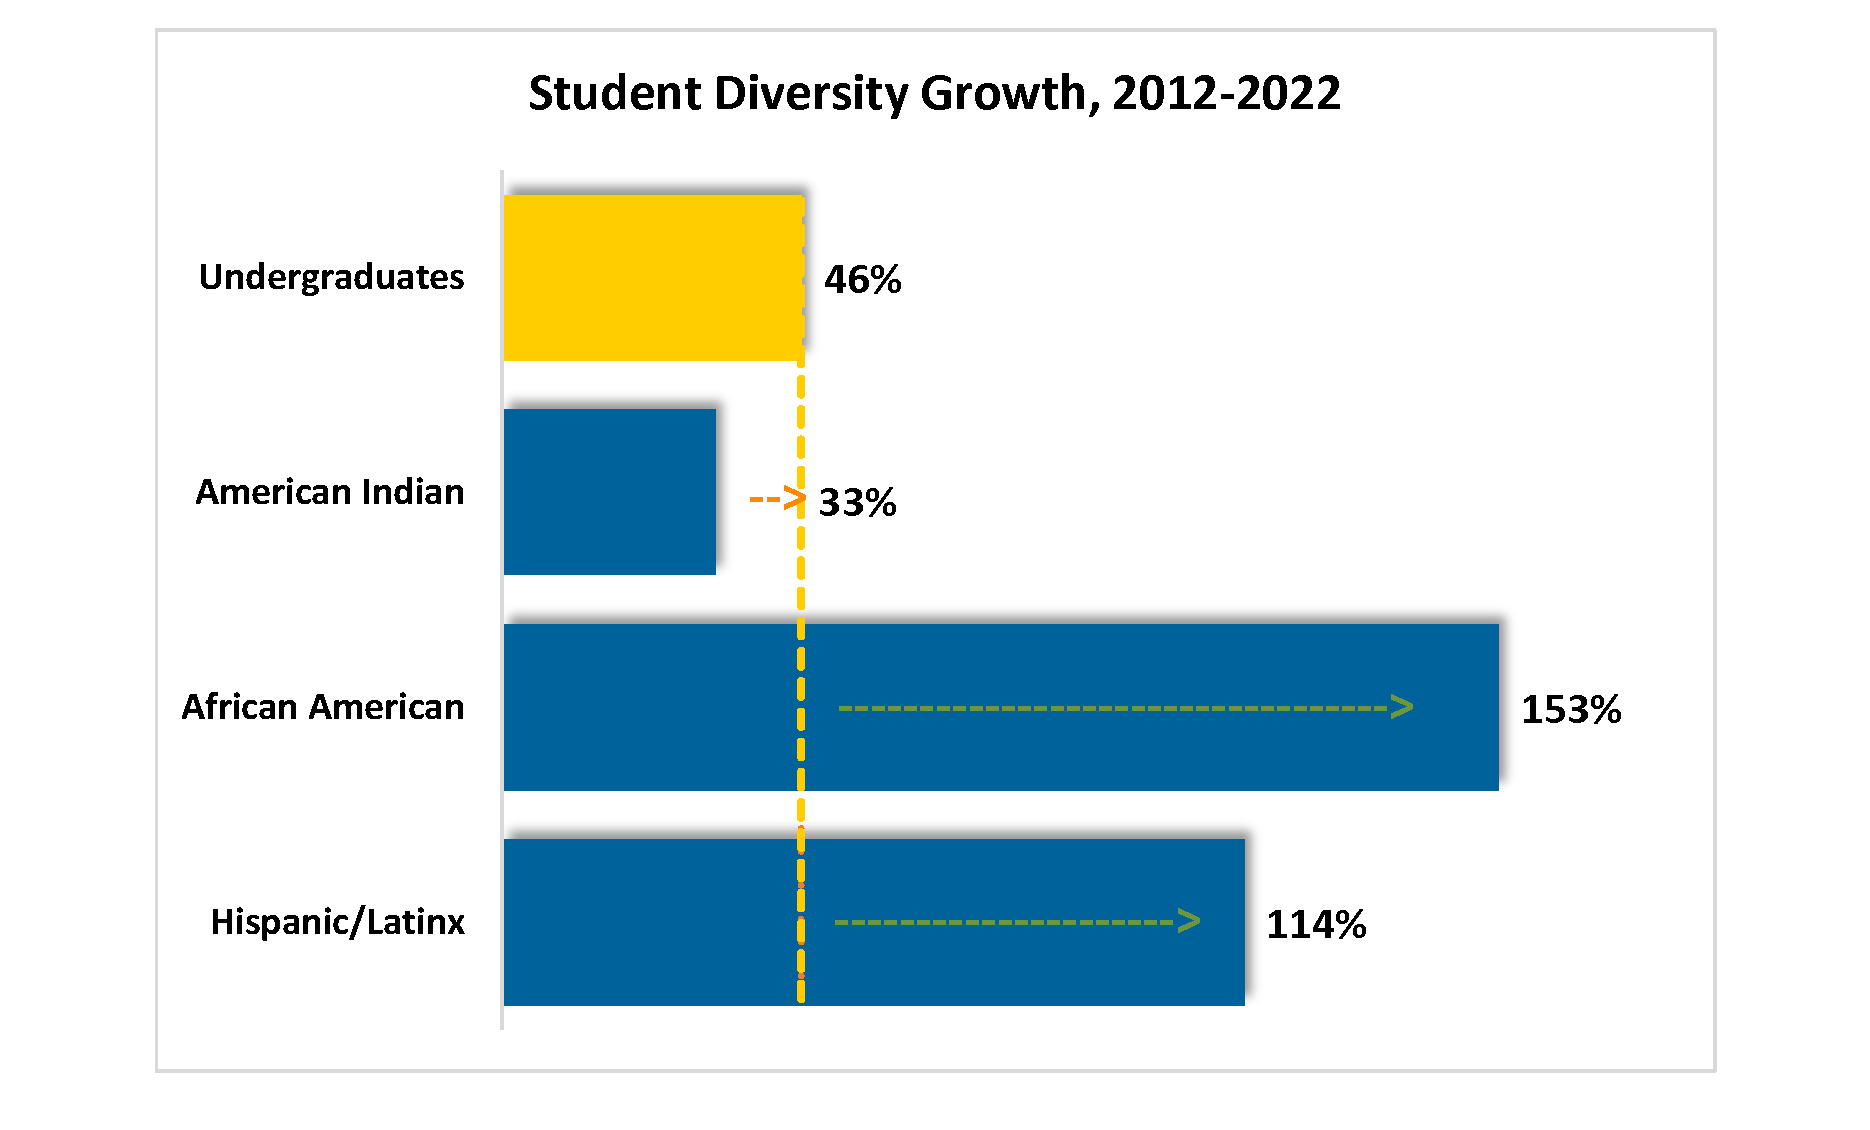 This shows student diversity increases at UC San Diego